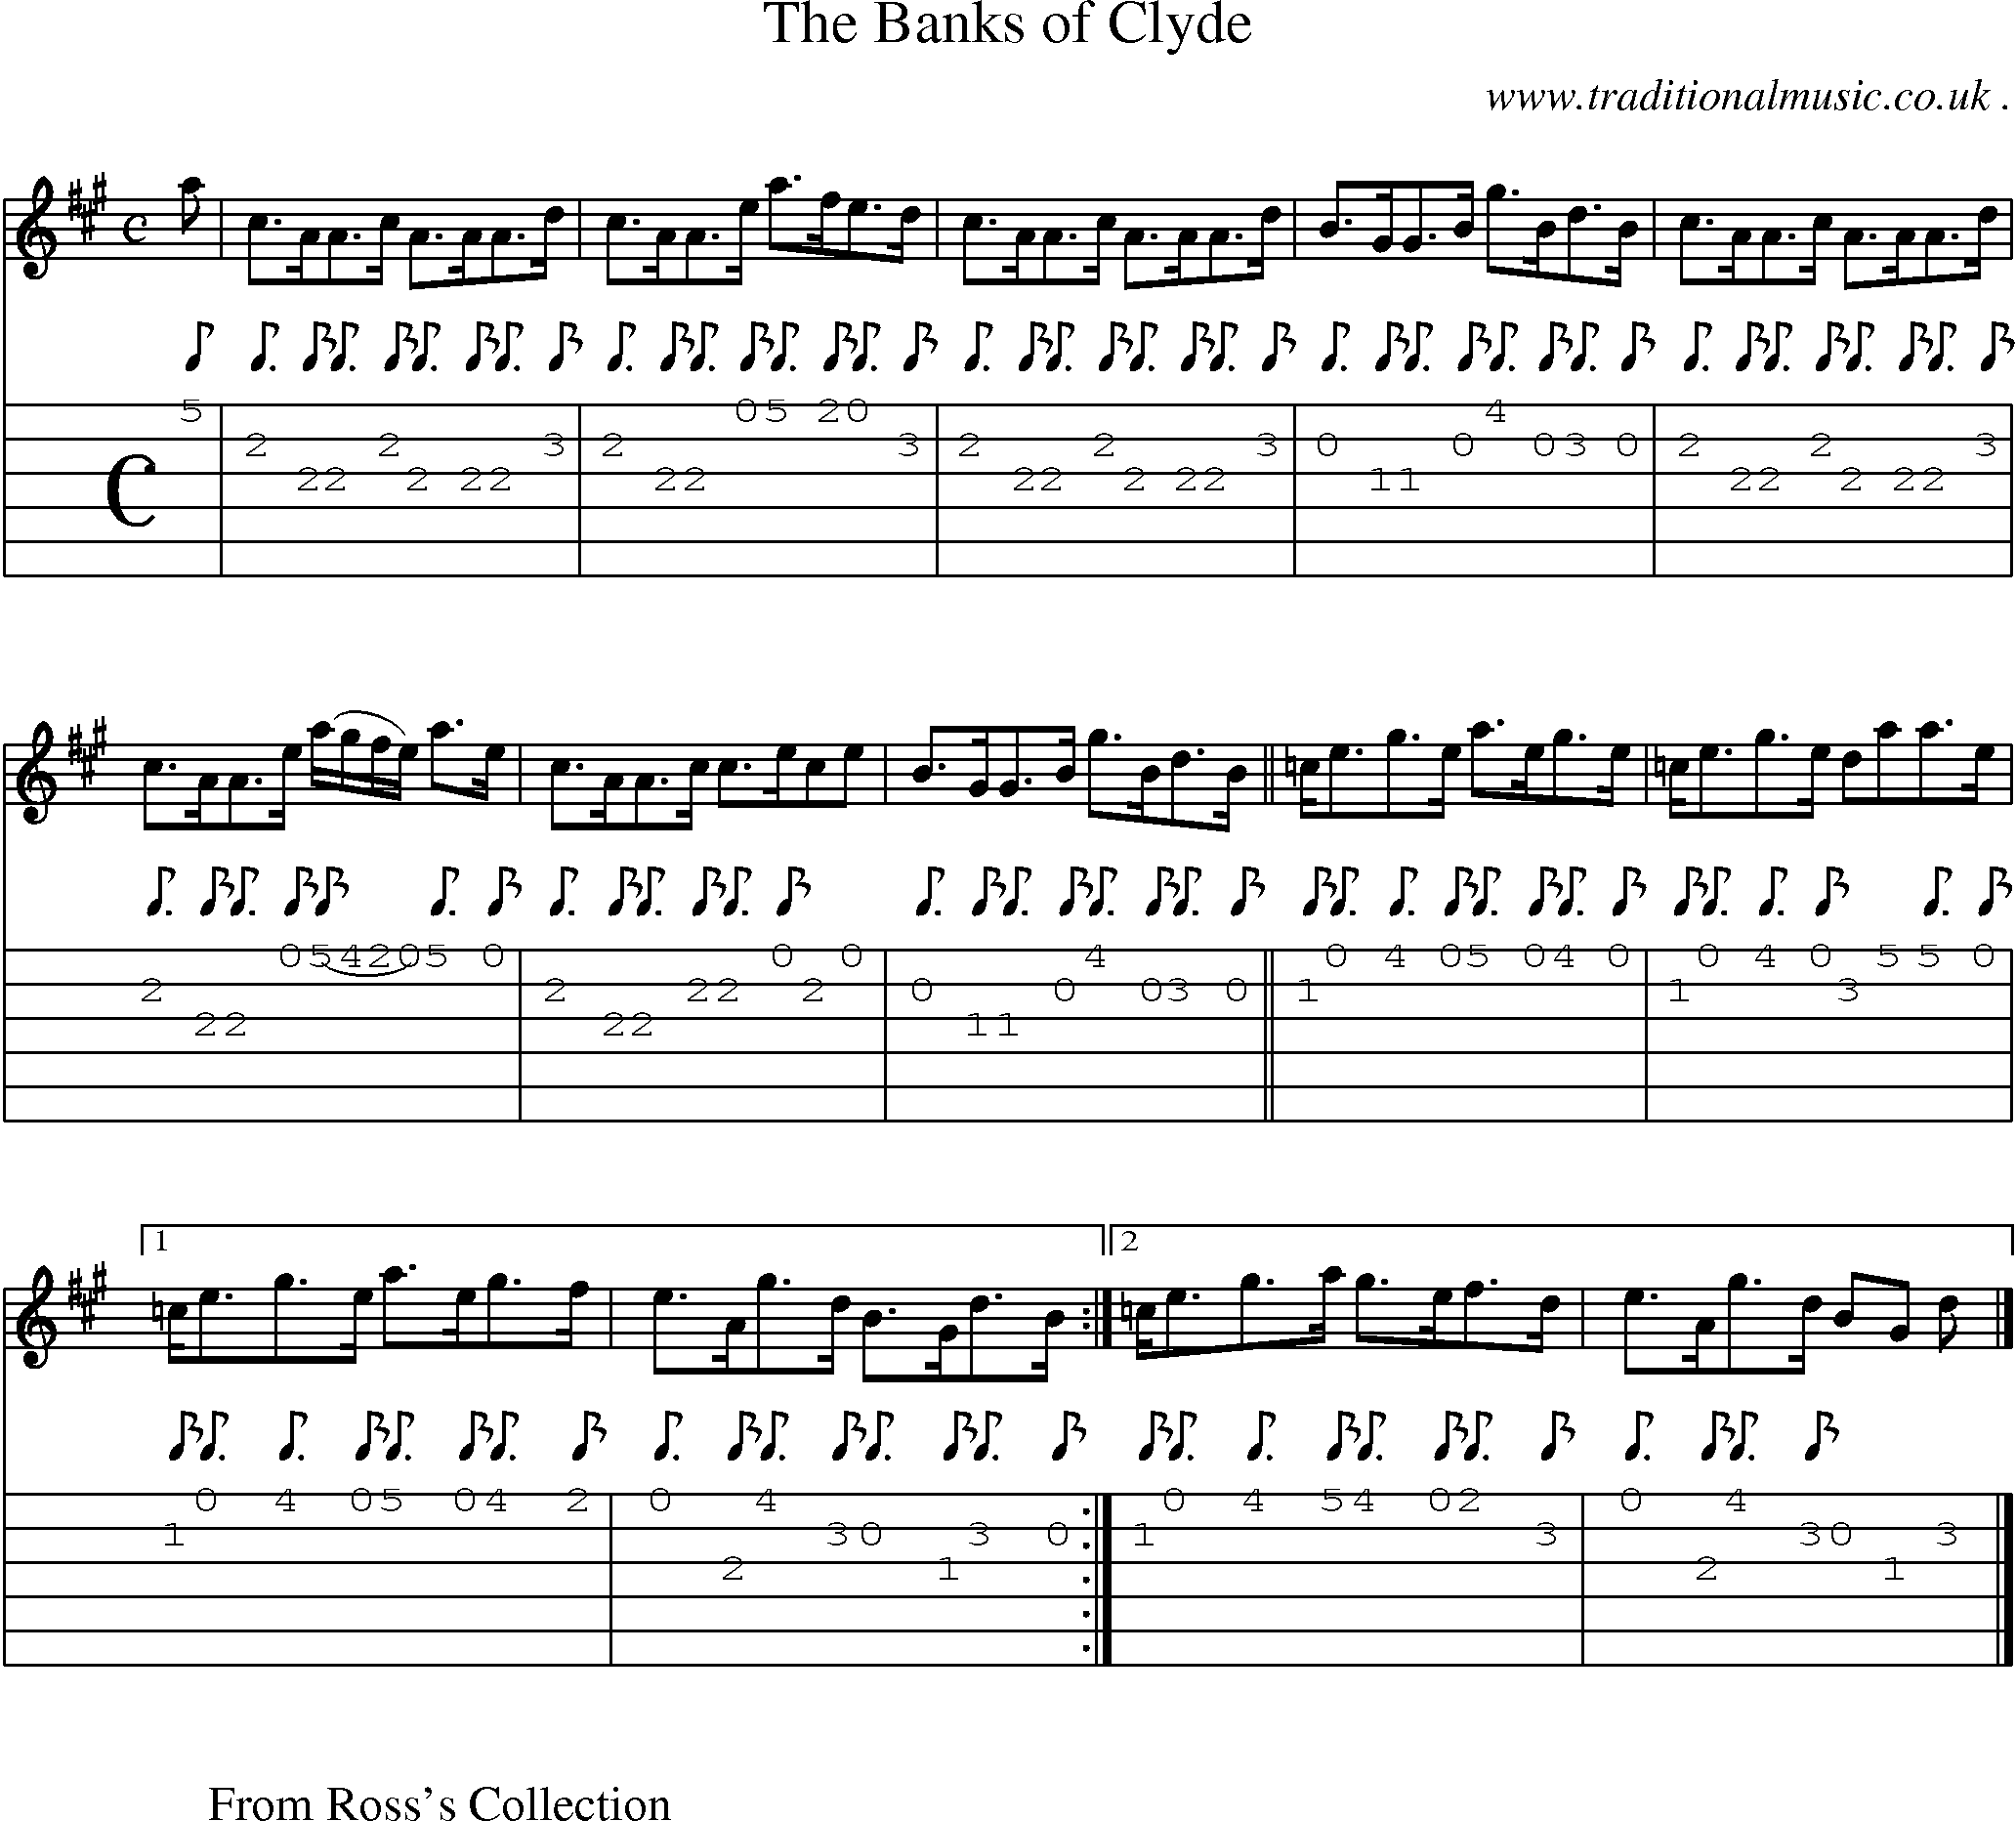 Sheet-music  score, Chords and Guitar Tabs for The Banks Of Clyde